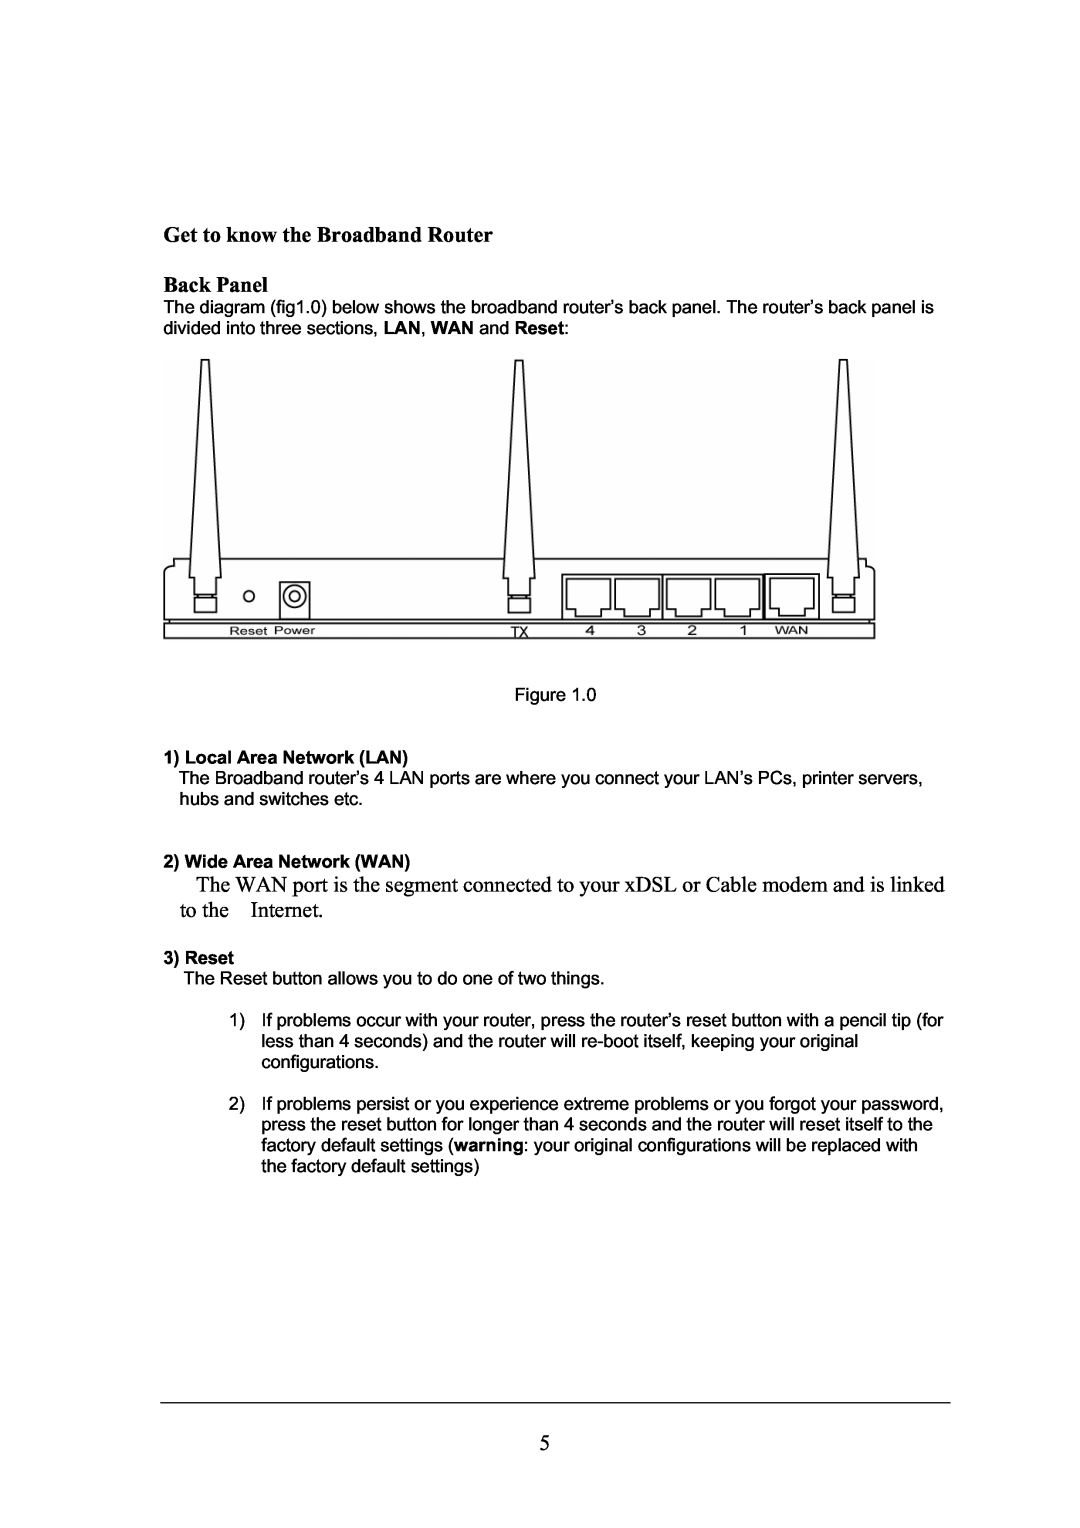 Topcom WBR 7101GMR manual Get to know the Broadband Router Back Panel, Local Area Network LAN, Wide Area Network WAN, Reset 